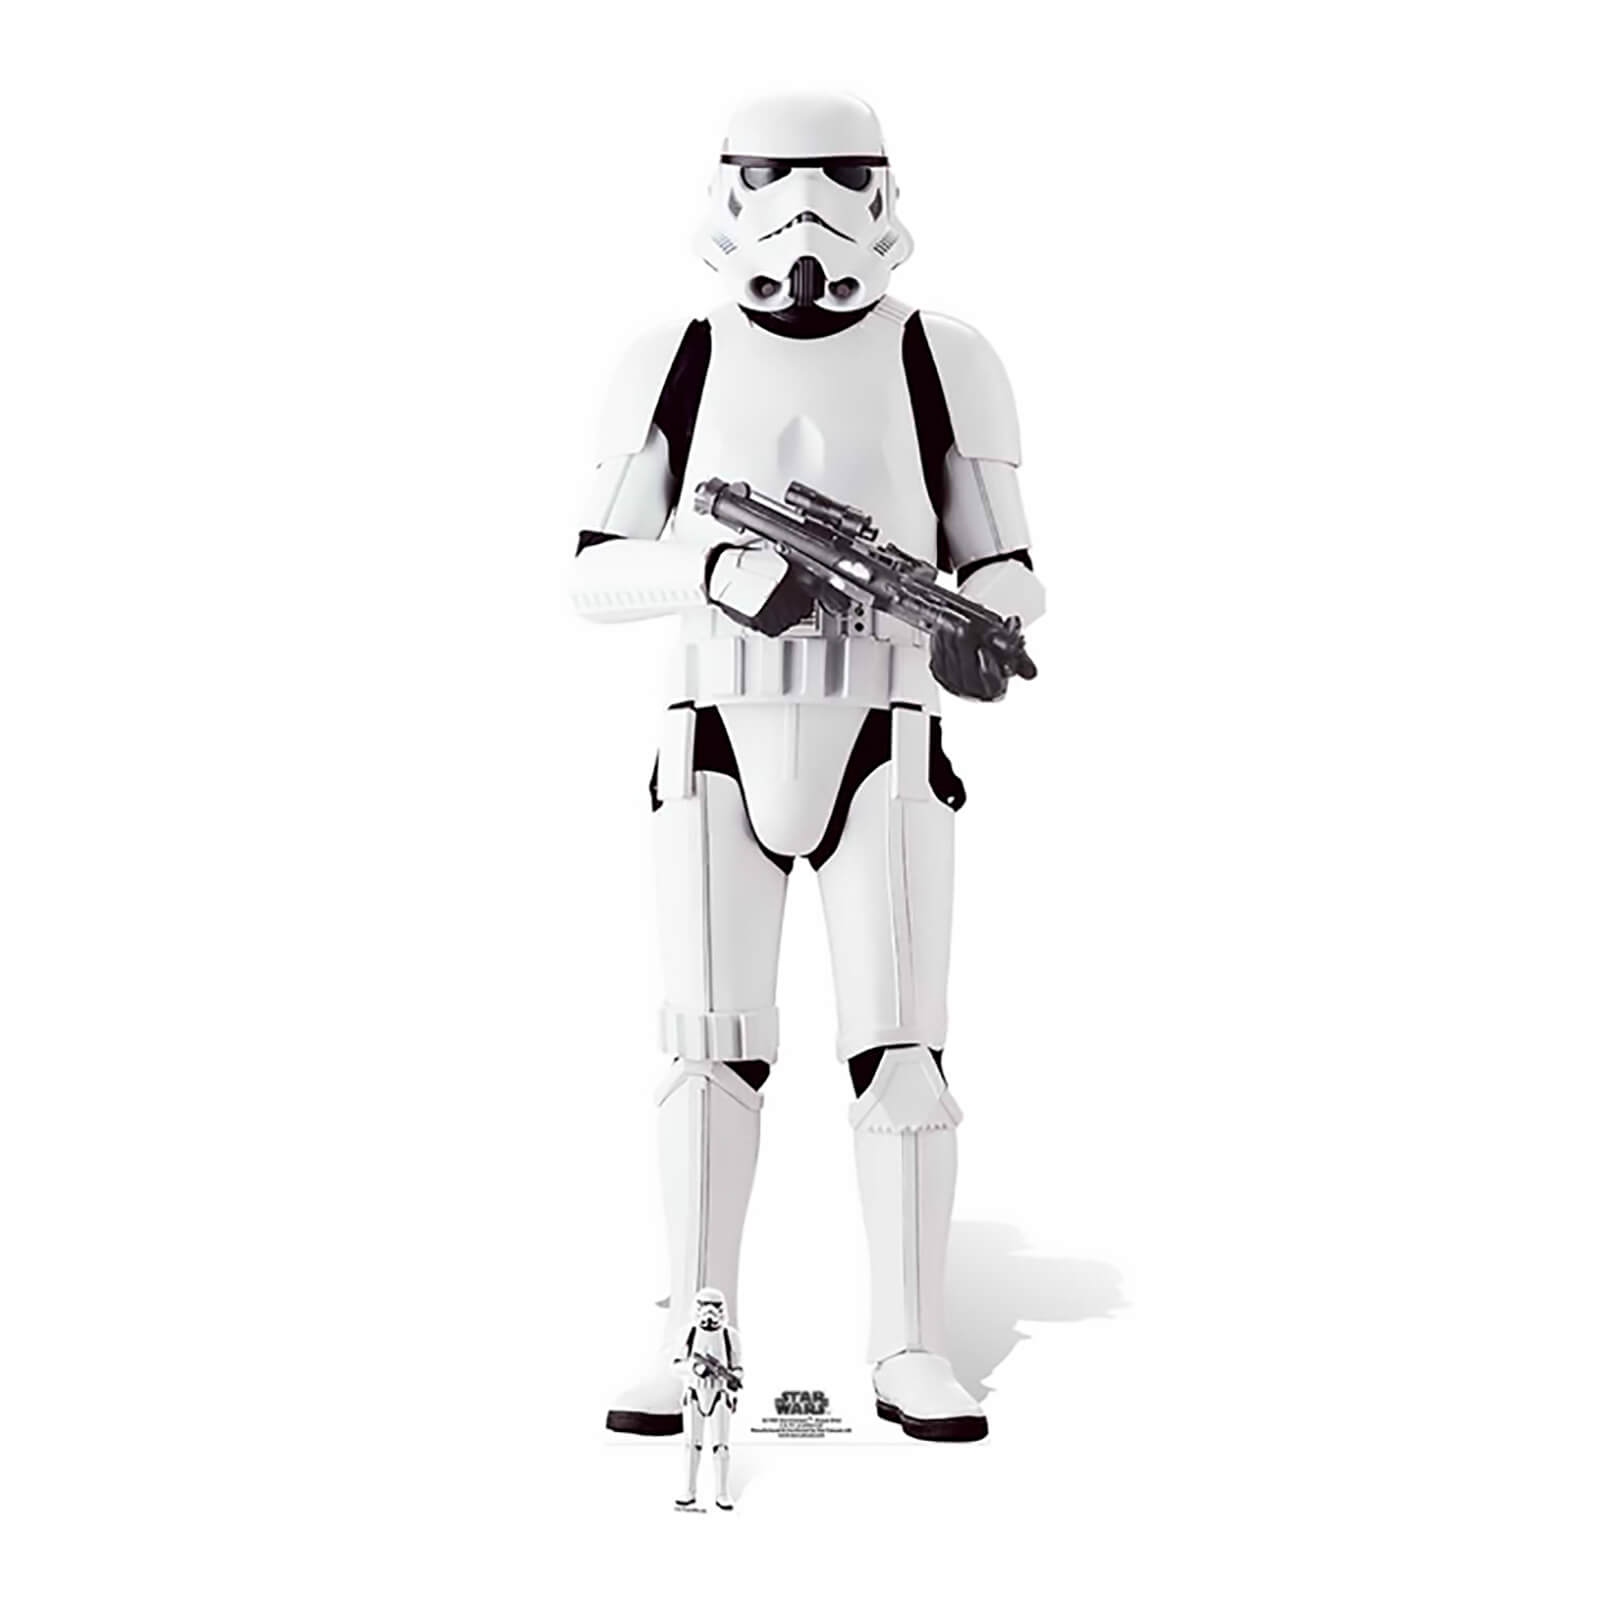 Star Wars: Rogue One - Imperial Stormtrooper Lifesize Cardboard Cut Out